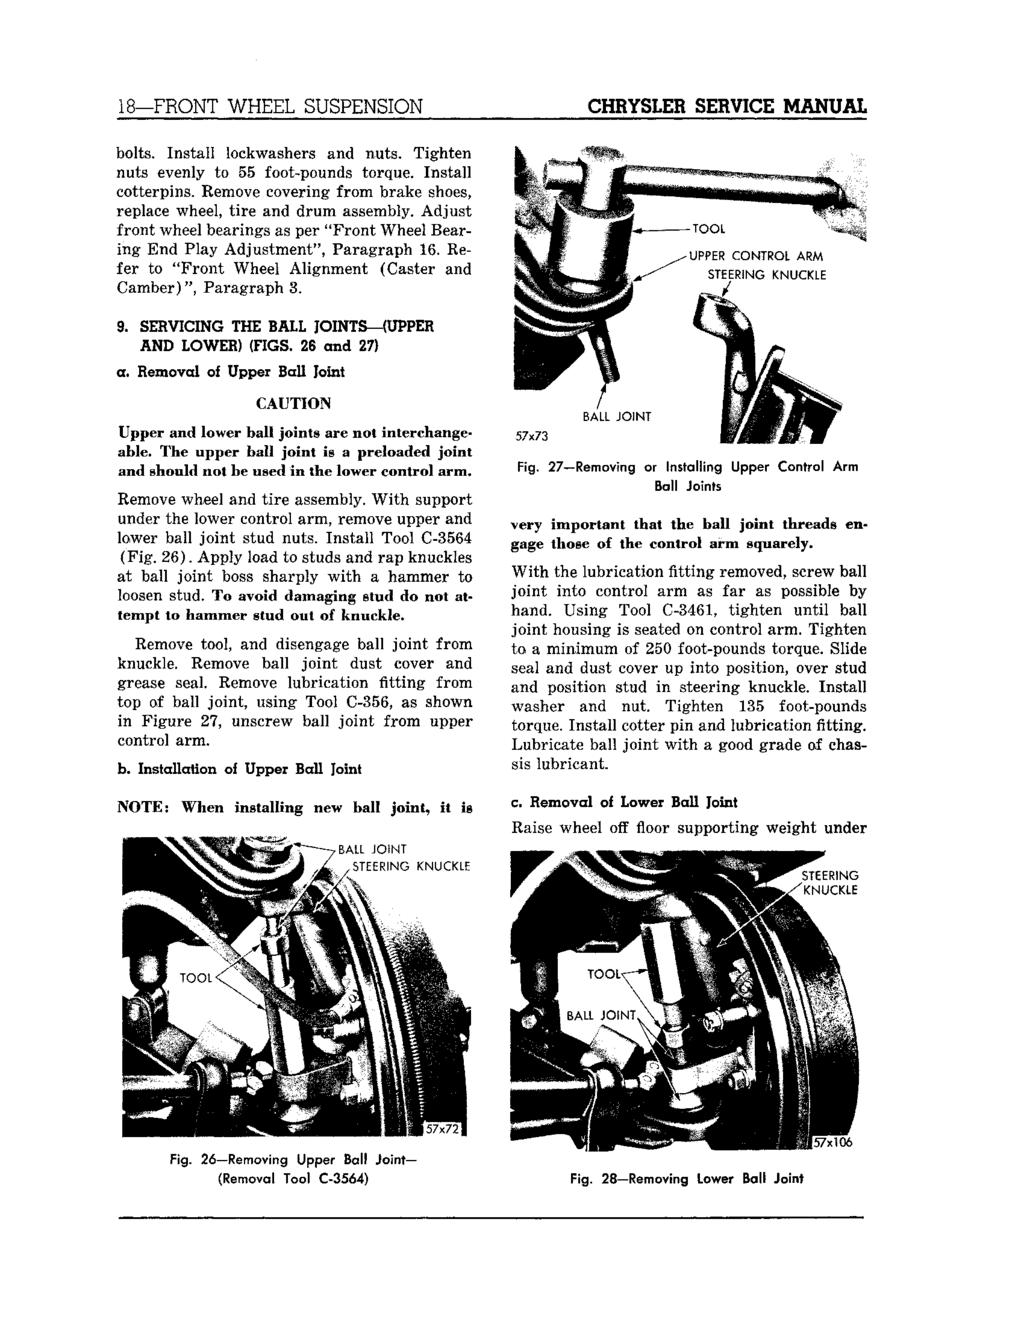 18 FRONT WHEEL SUSPENSION CH1YSLE1 SERVICE MANUAL bolts. Install lockwashers and nuts. Tighten nuts evenly to 55 foot-pounds torque. Install cotterpins.